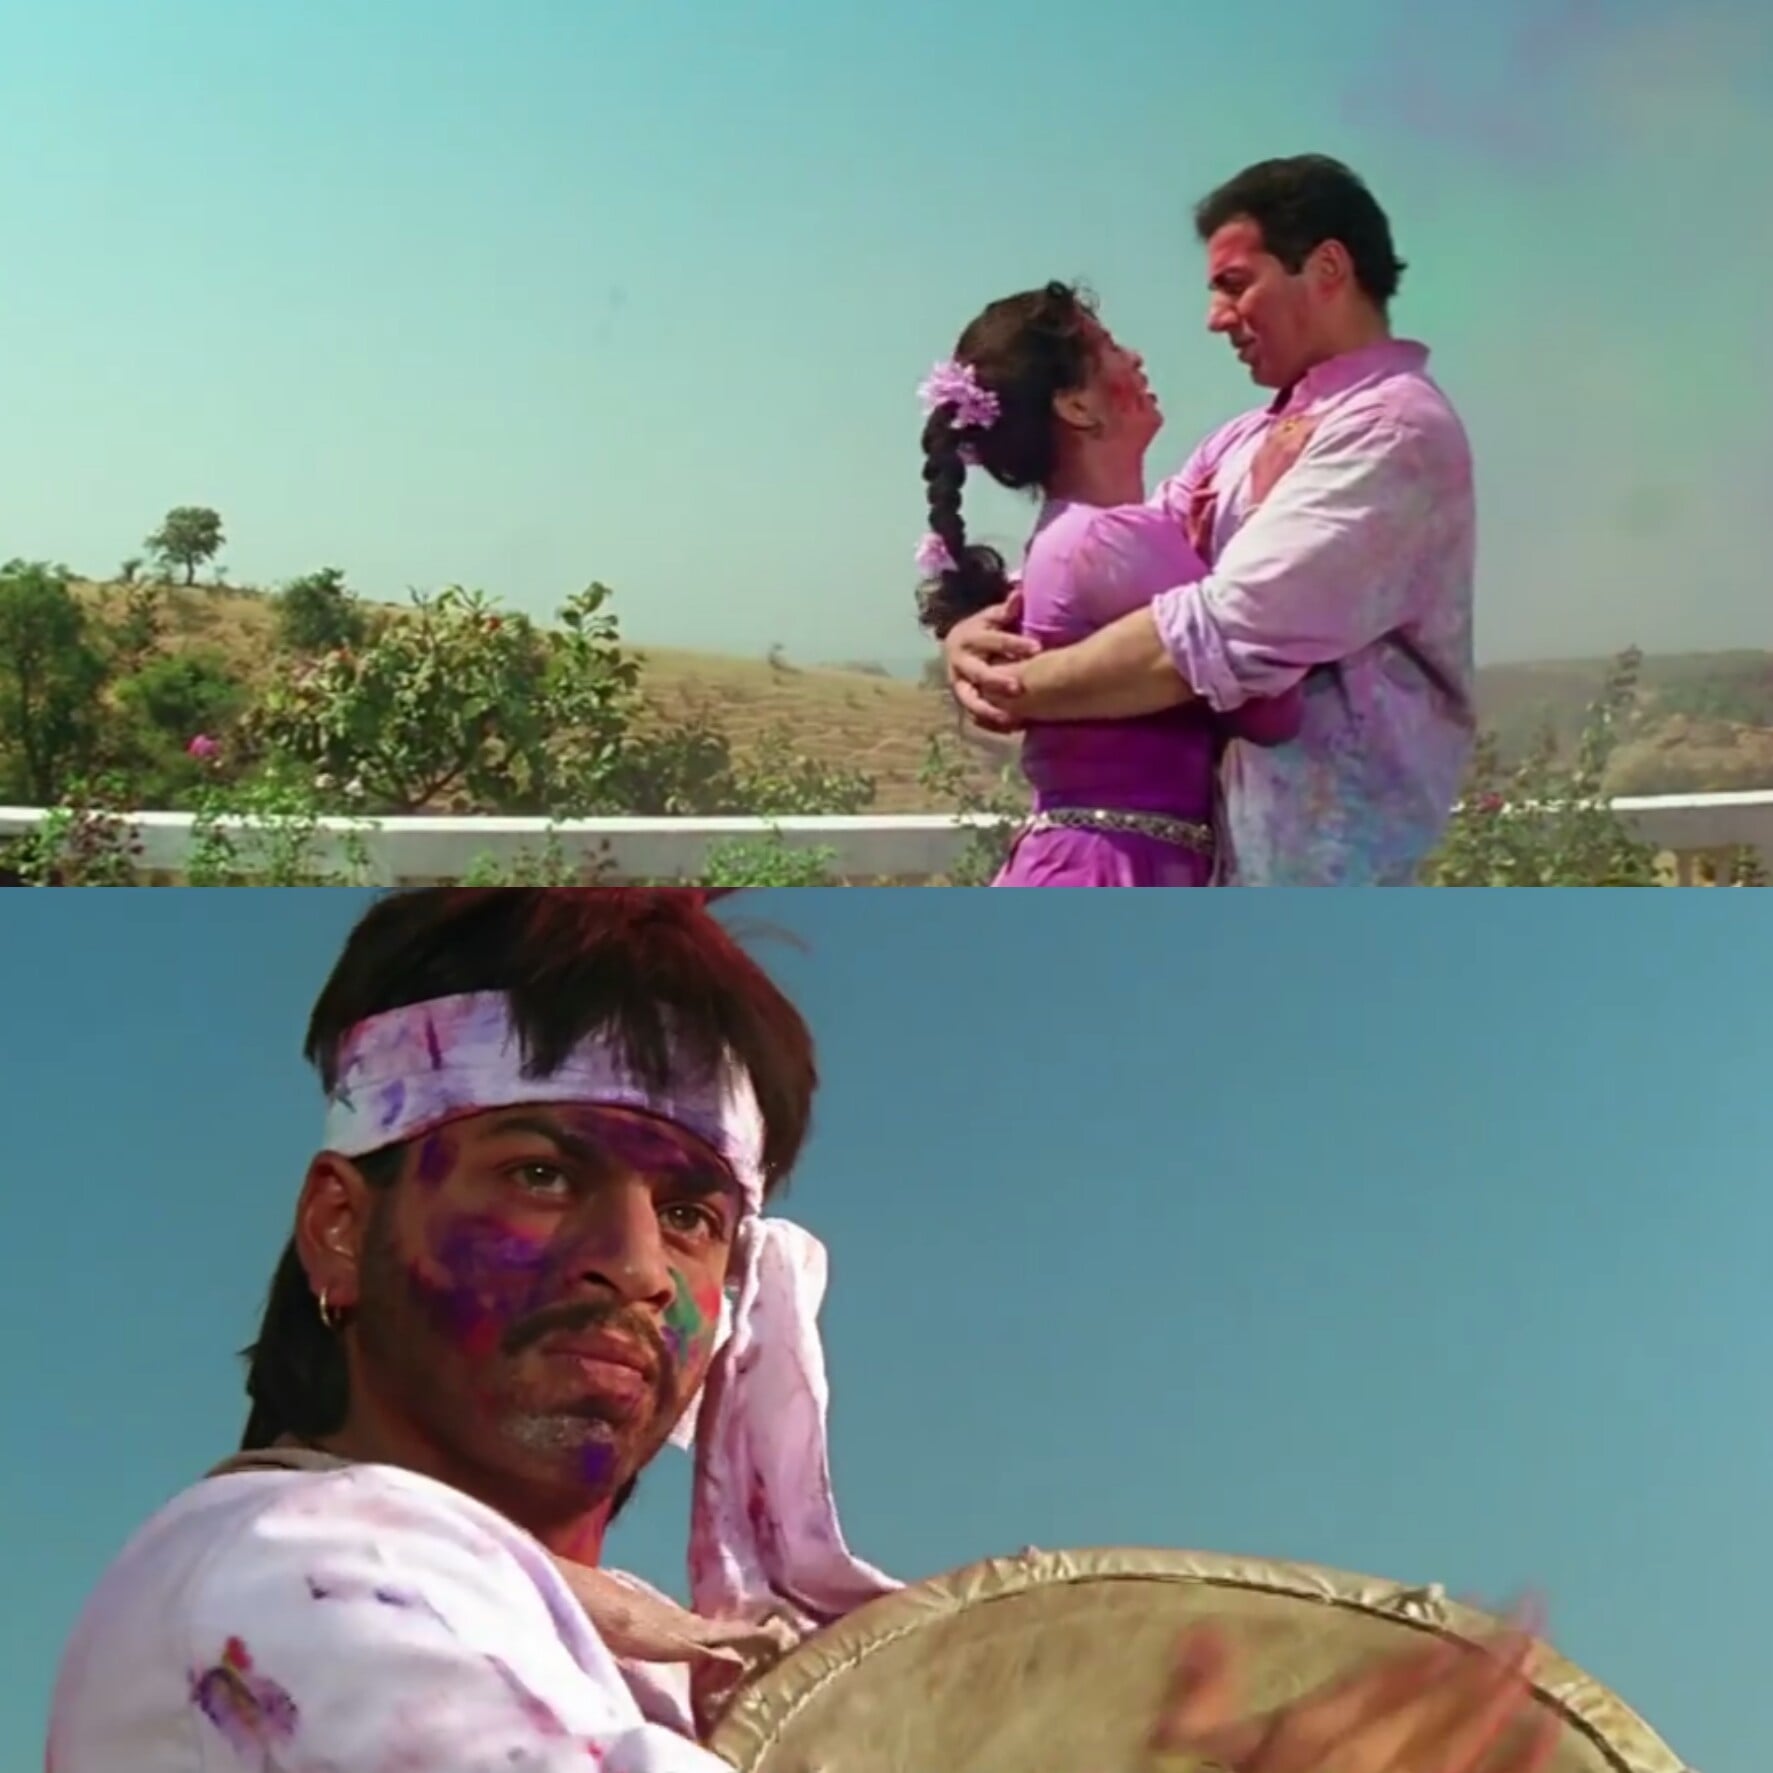 Shahrukh Khan getting angry after seeing Sunny Deol hugging Juhi Chawla in the darr movie holi song meme template